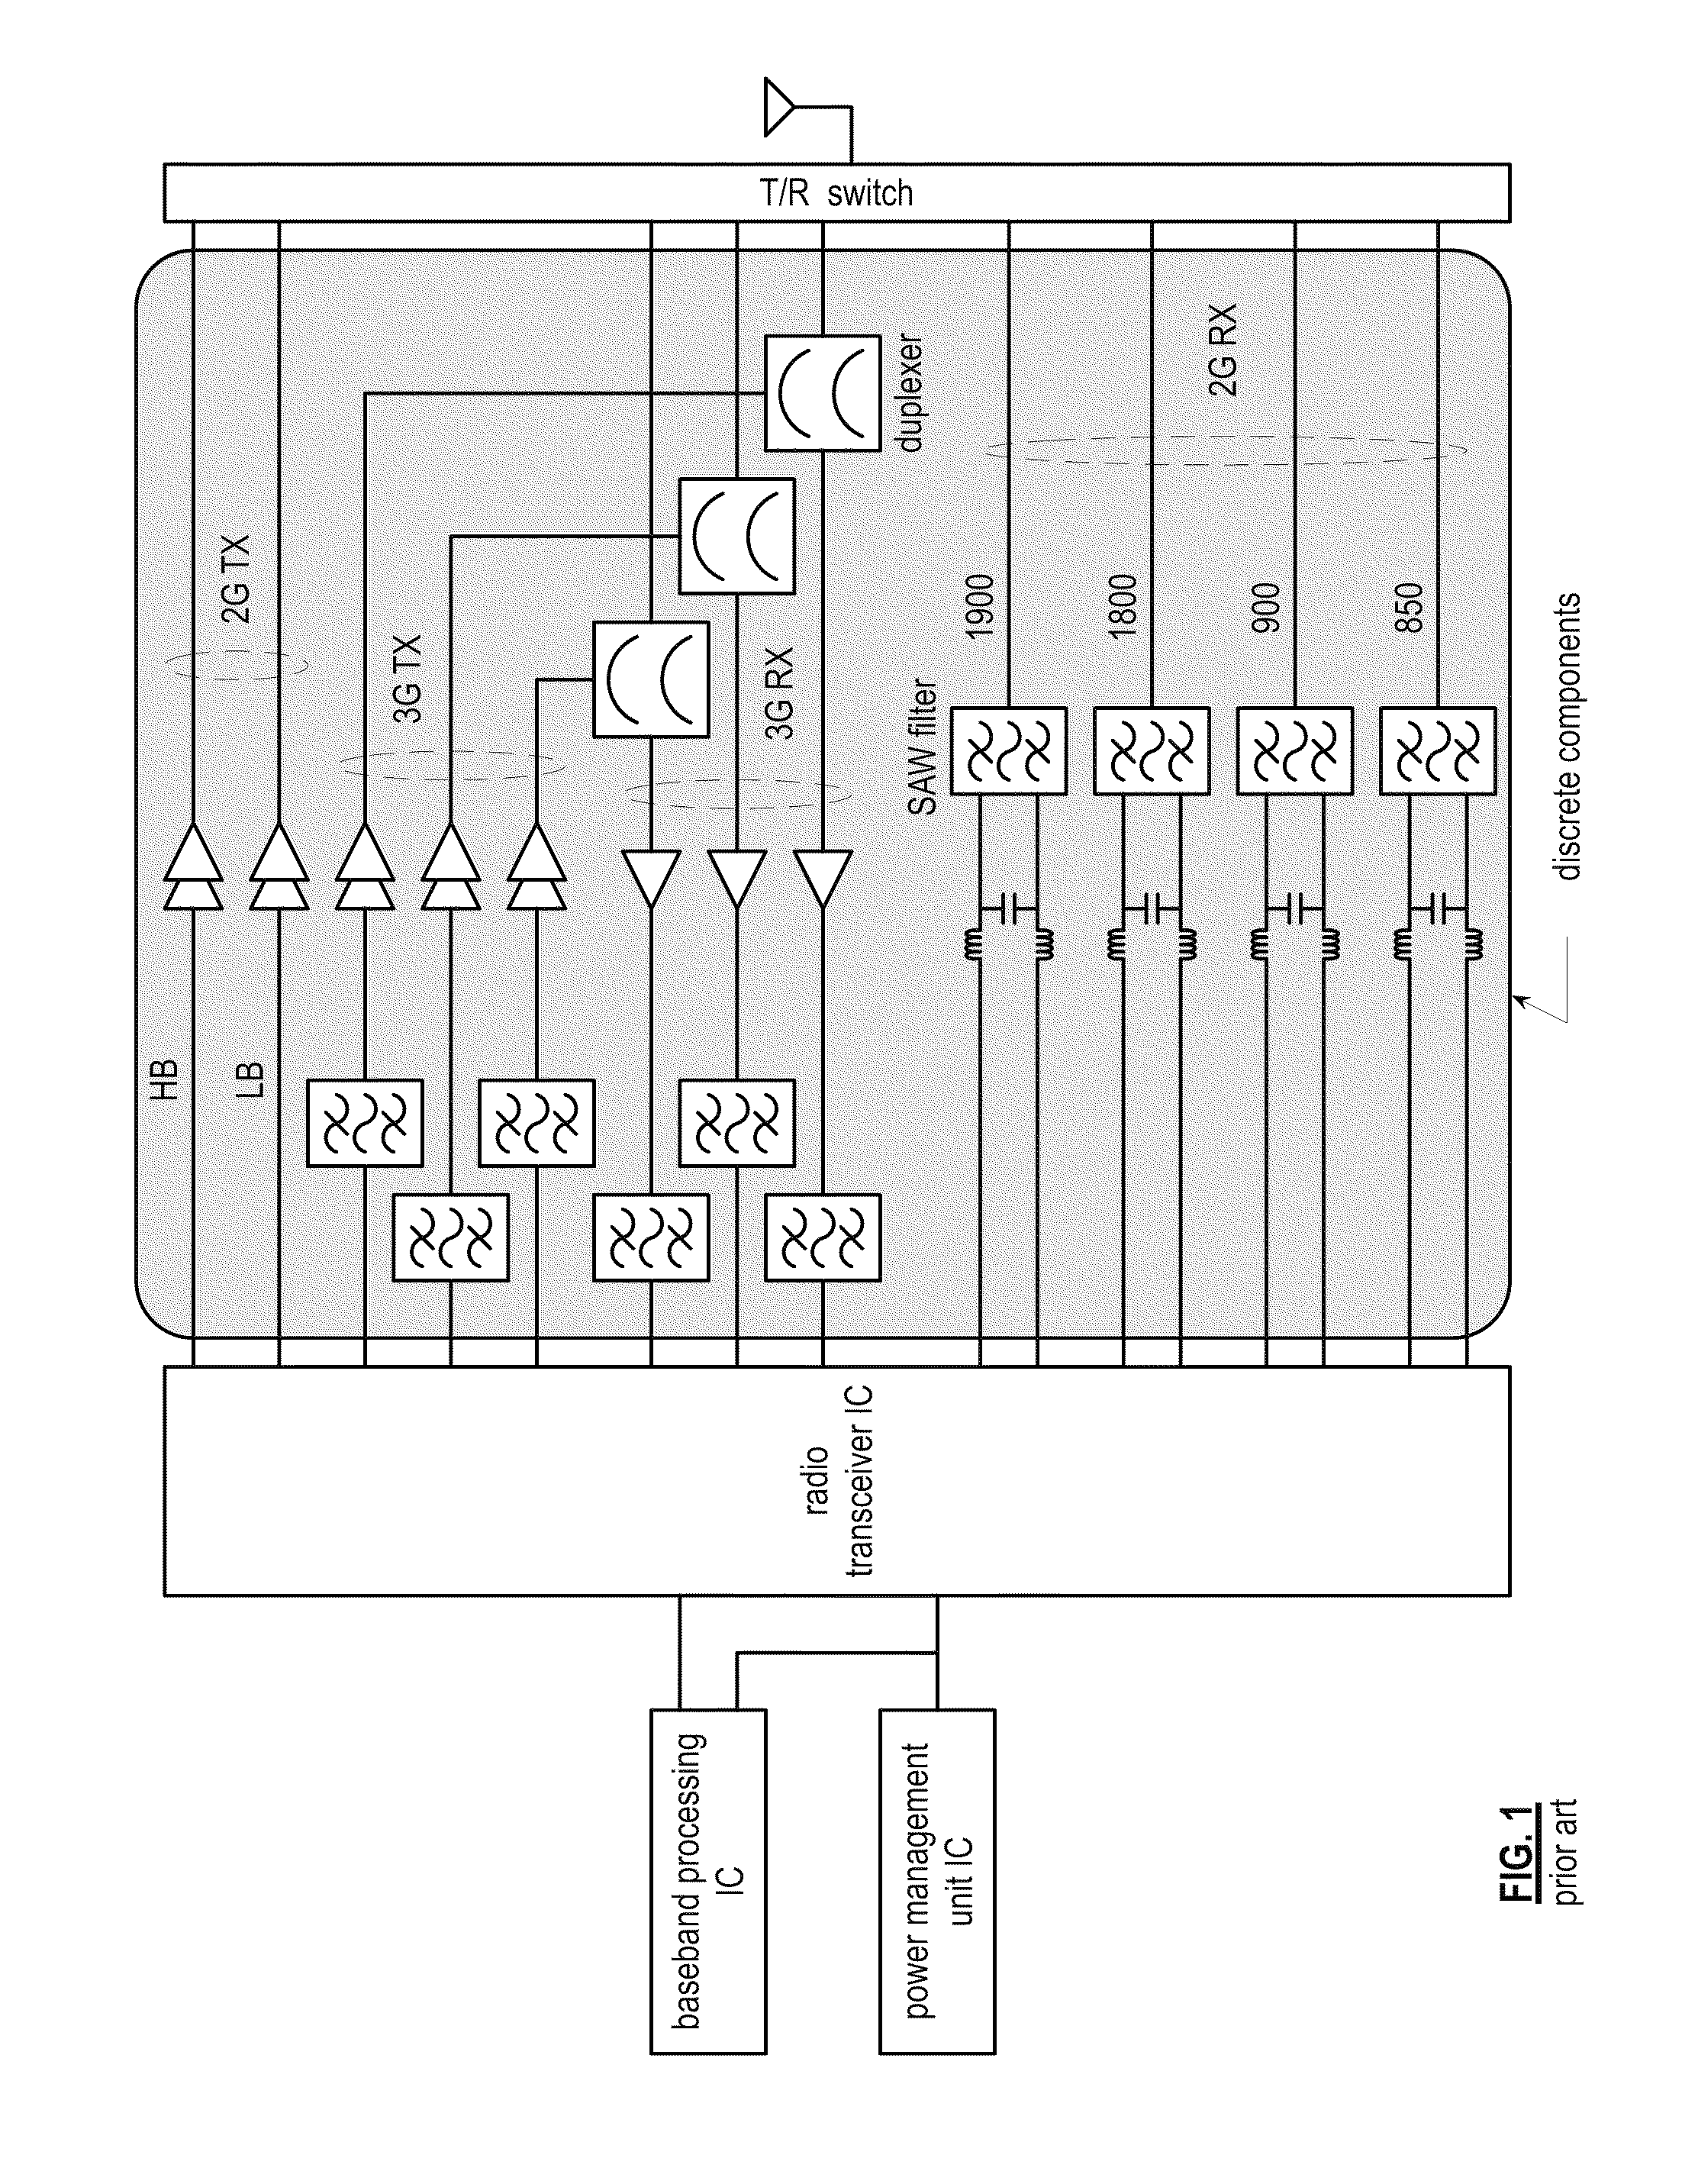 Saw-less receiver with a frequency translated BPF having a negative resistance